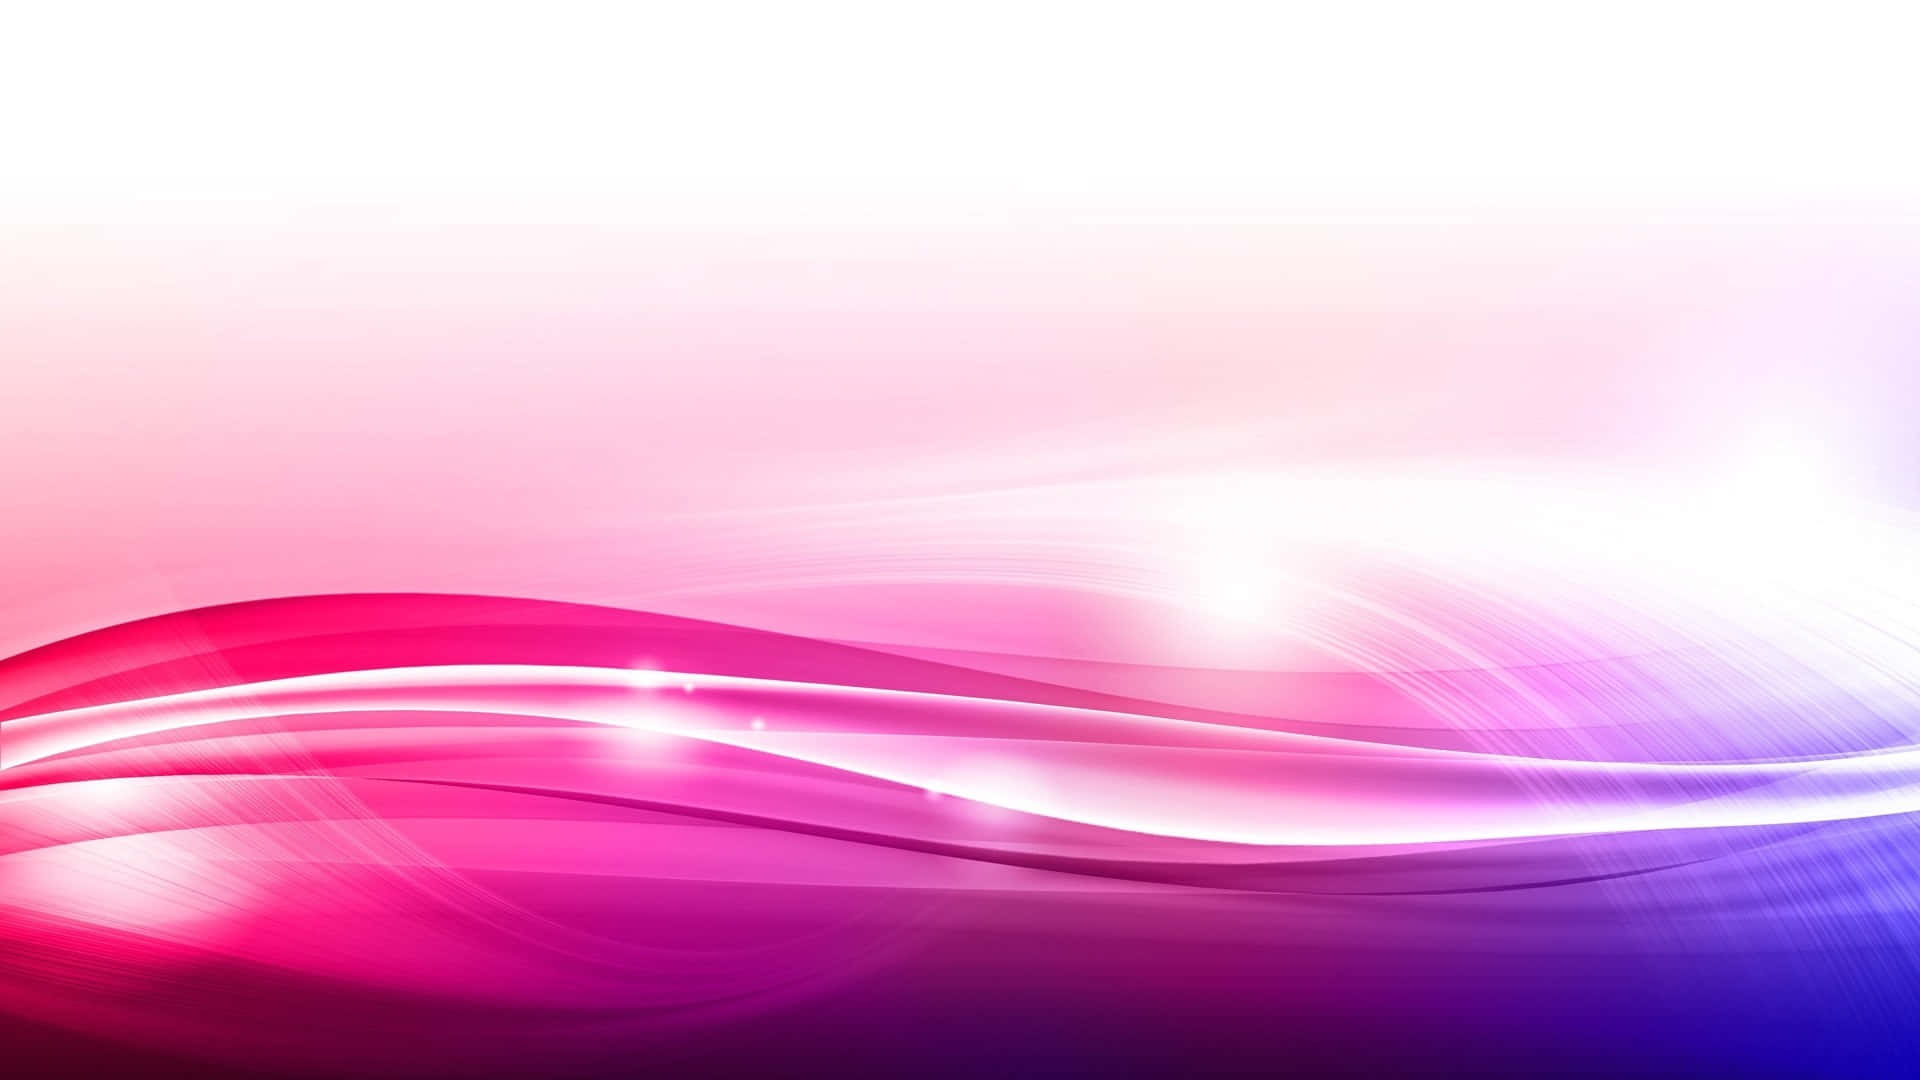 Realize Your Dreams With Stunning Gradients of Purple and Pink